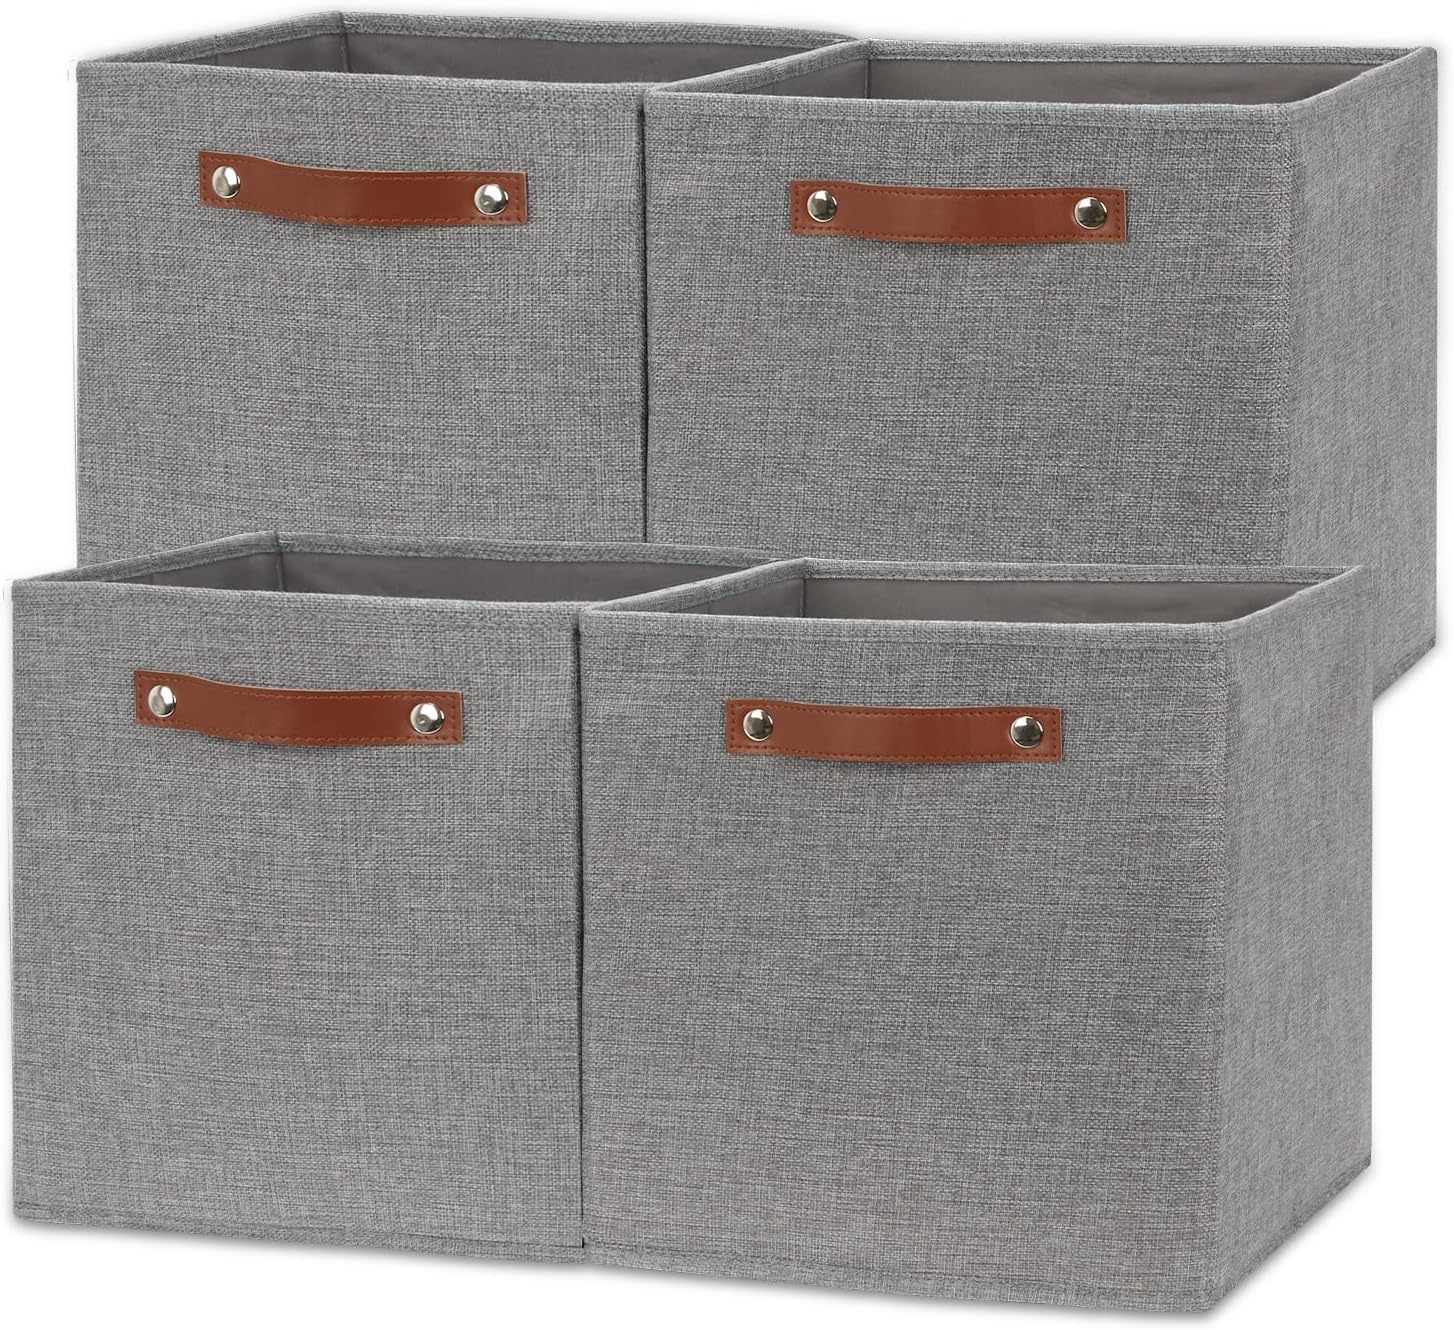 Temary 12x12 Storage Cube Bins 4 Pack Fabric Storage Cubes Storage Bins with Leather Handles, Storage Baskets Foldable Cube Organizers Bins for Home, Office, Nursery (Grey)